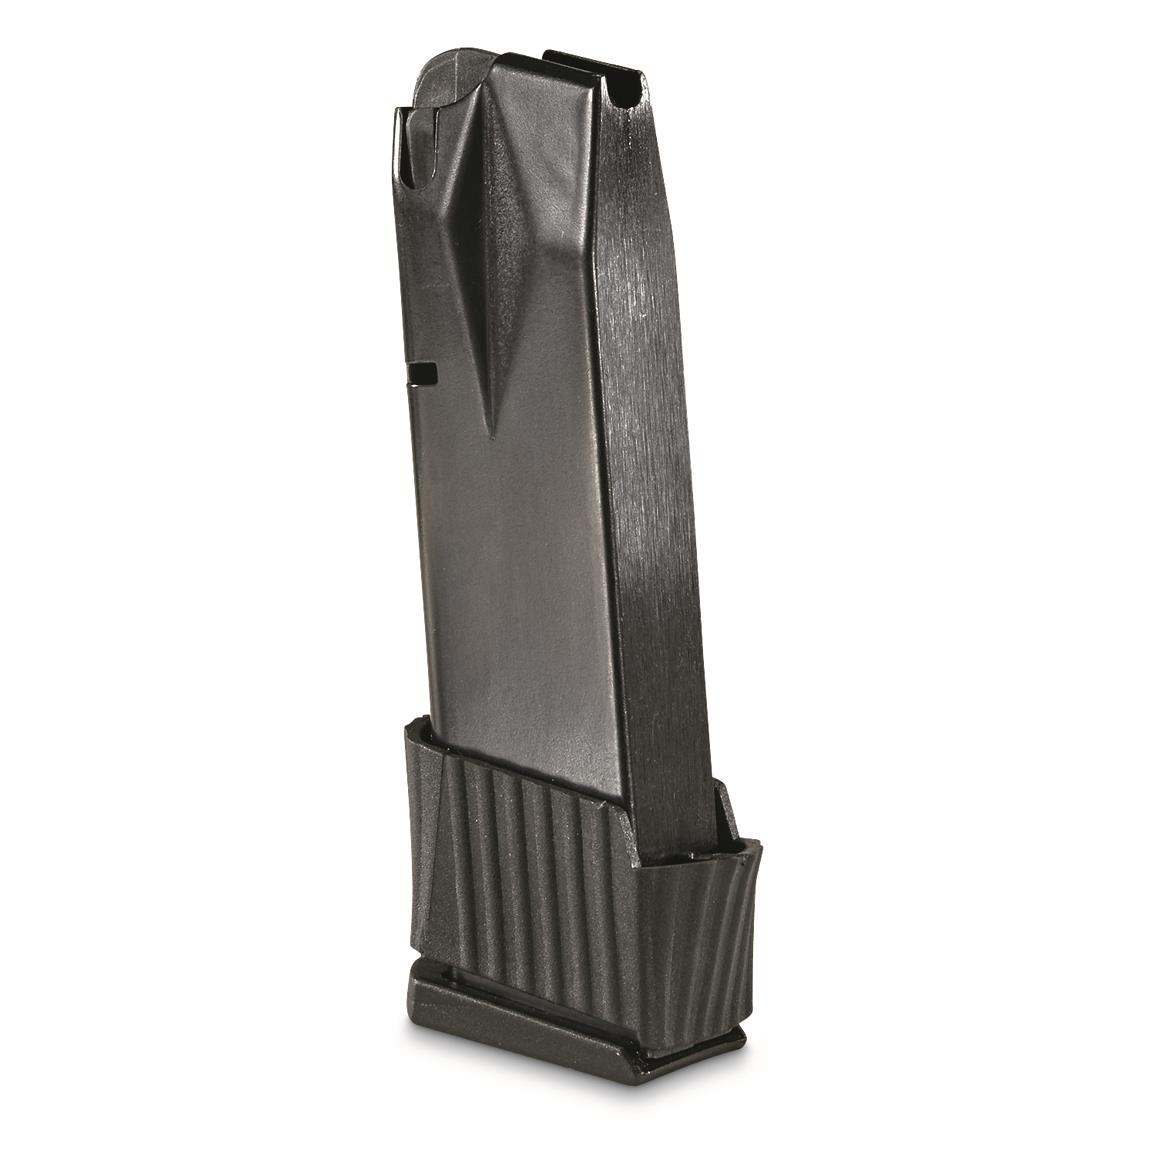 7rd Factory NEW Magazines Mags Clips Taurus G2S T177 9mm 2 